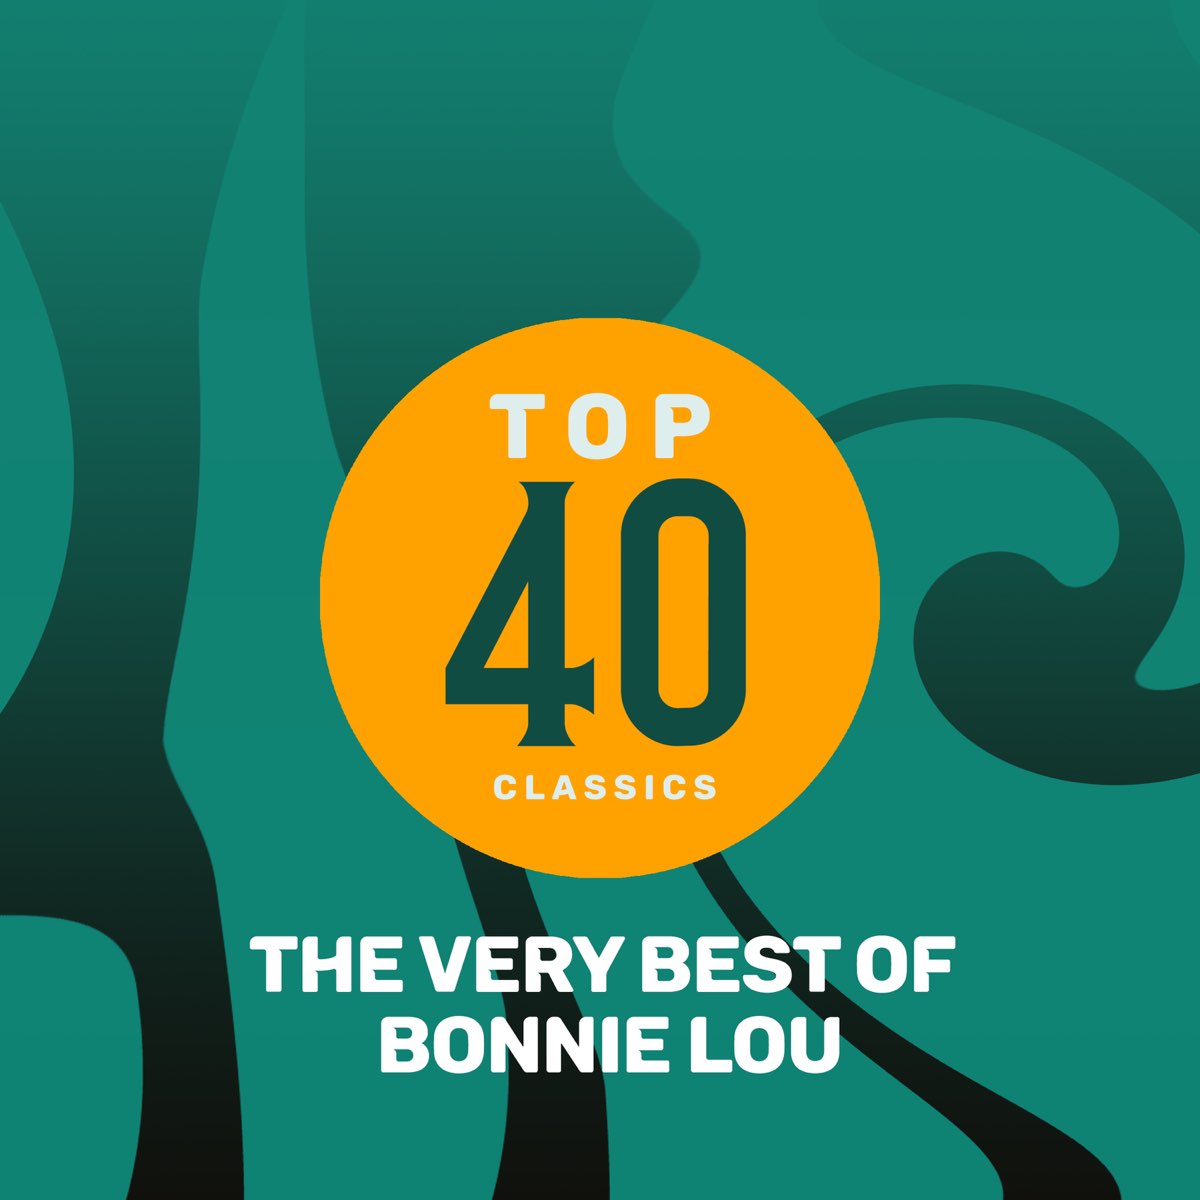 apple-music-bonnie-lou-top-40-classics-the-very-best-of